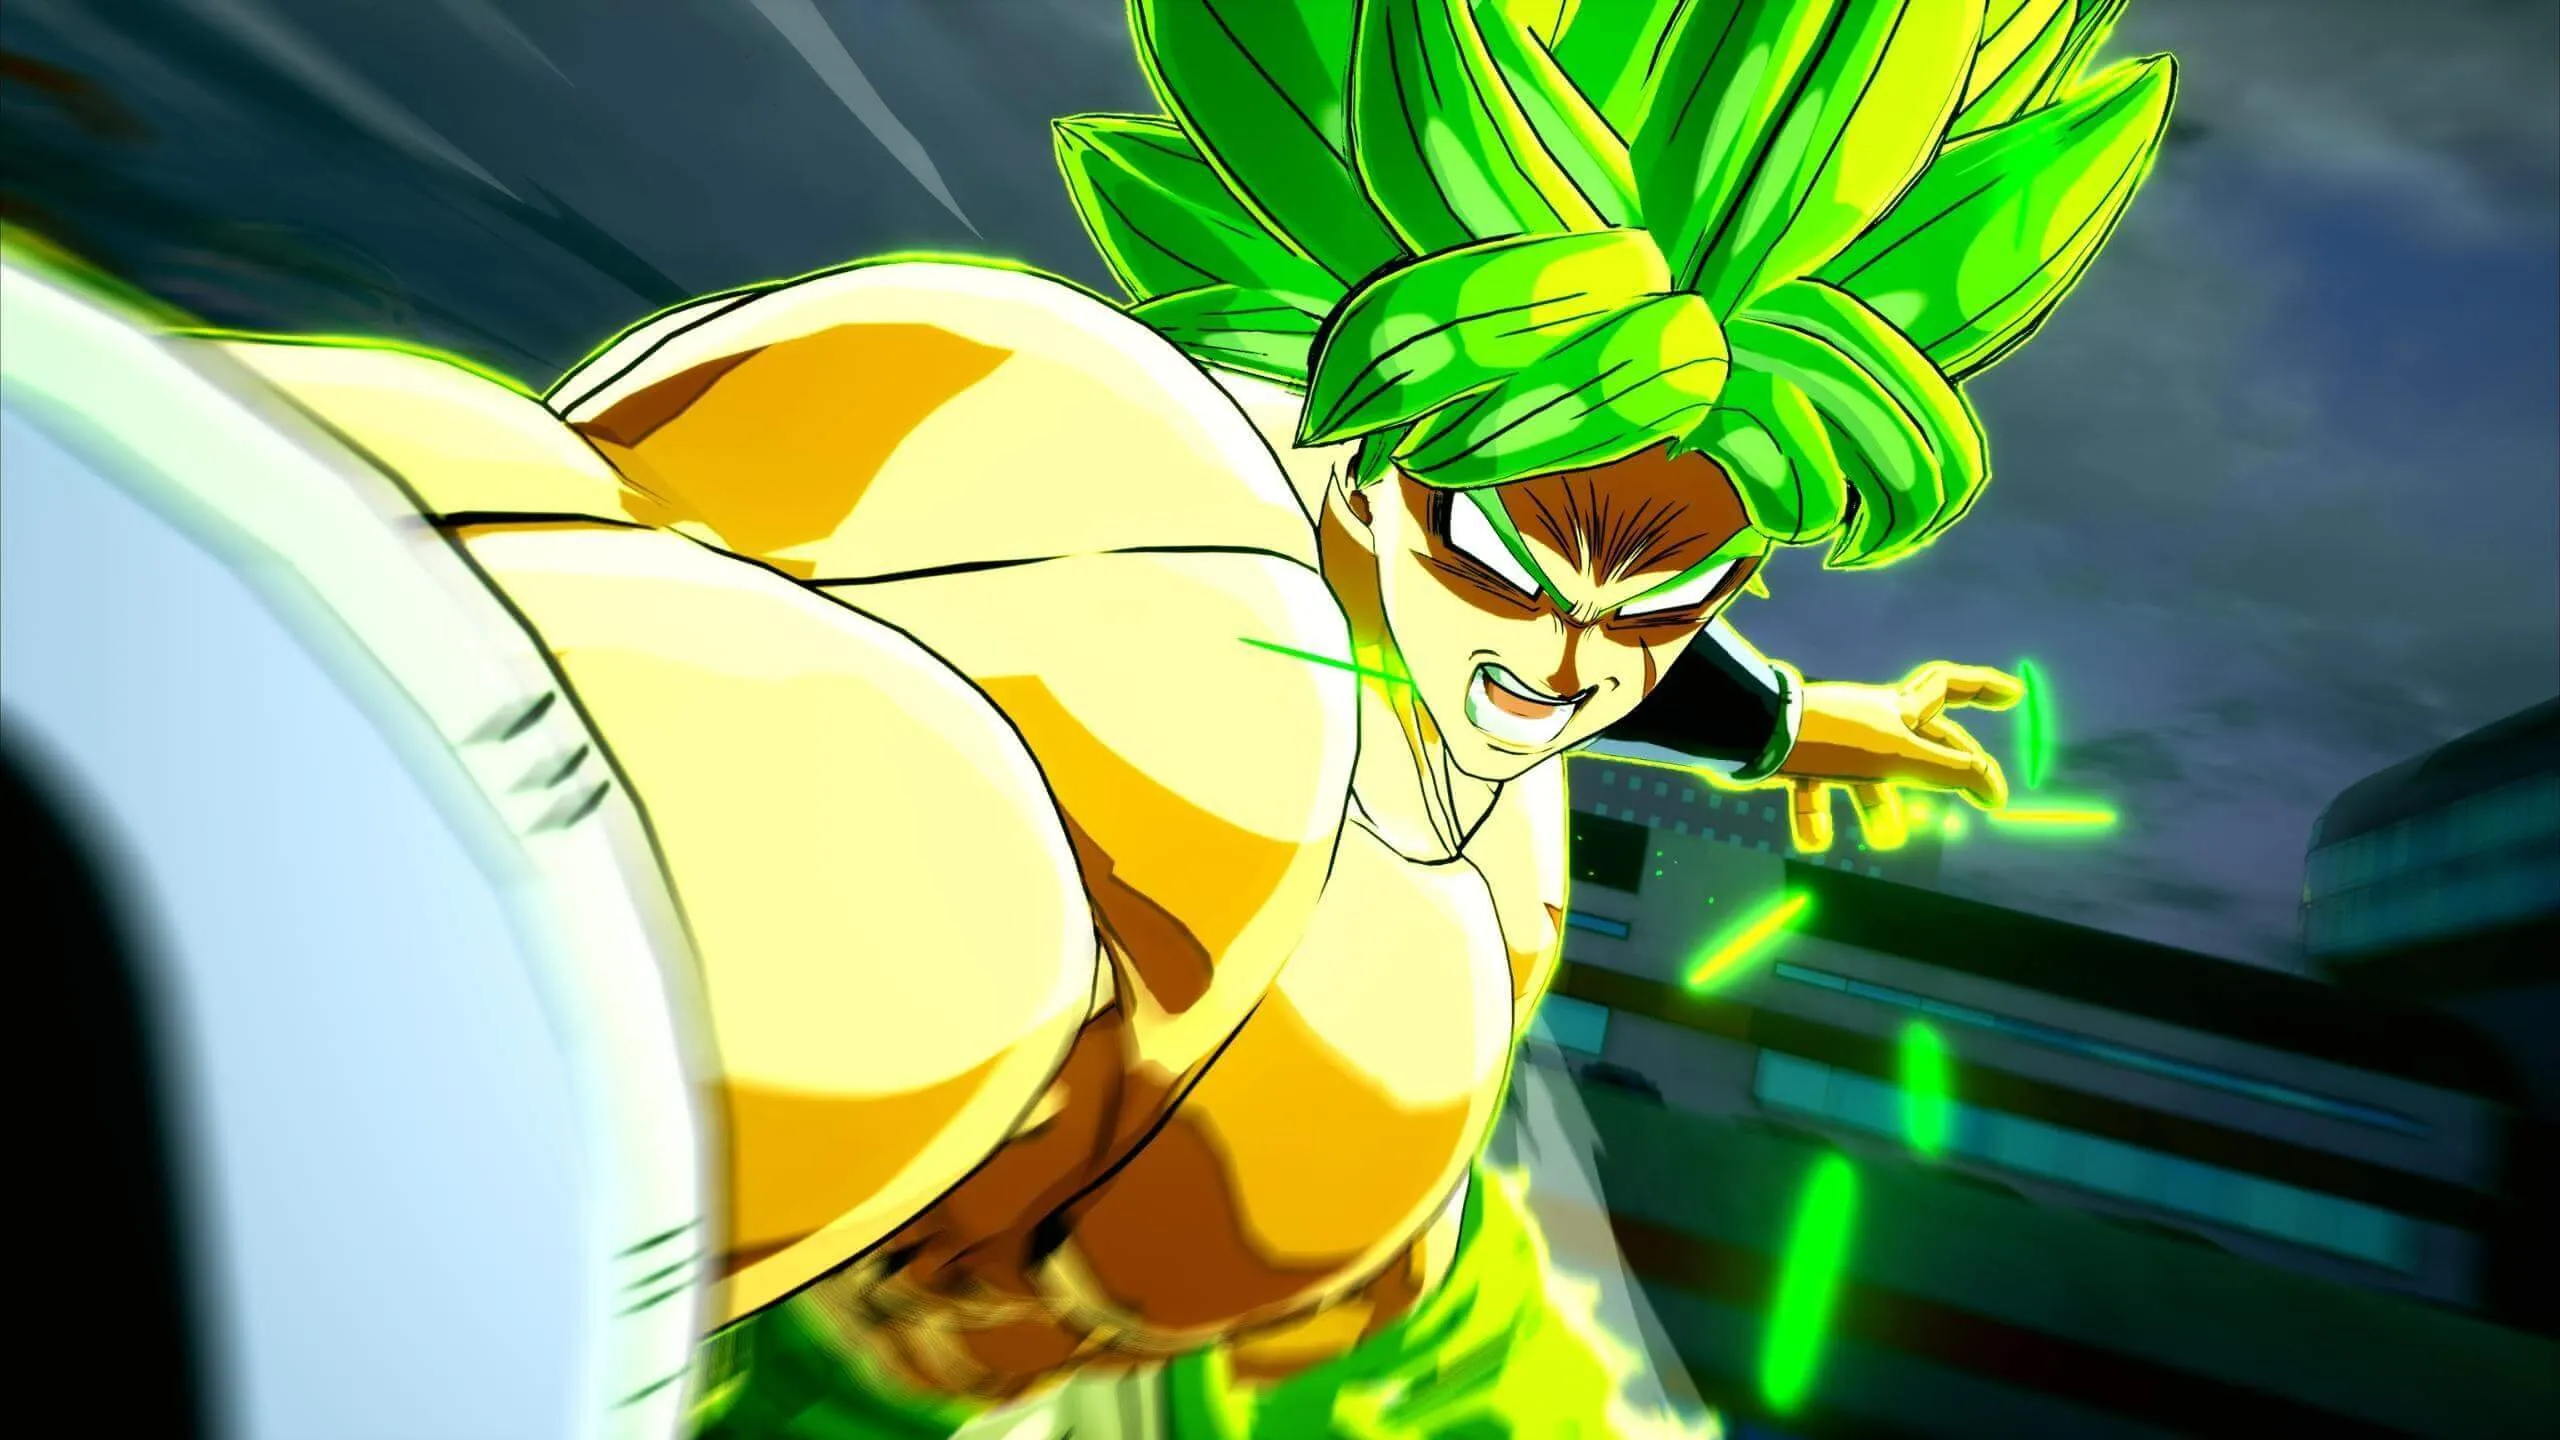 Broly from DBSZ